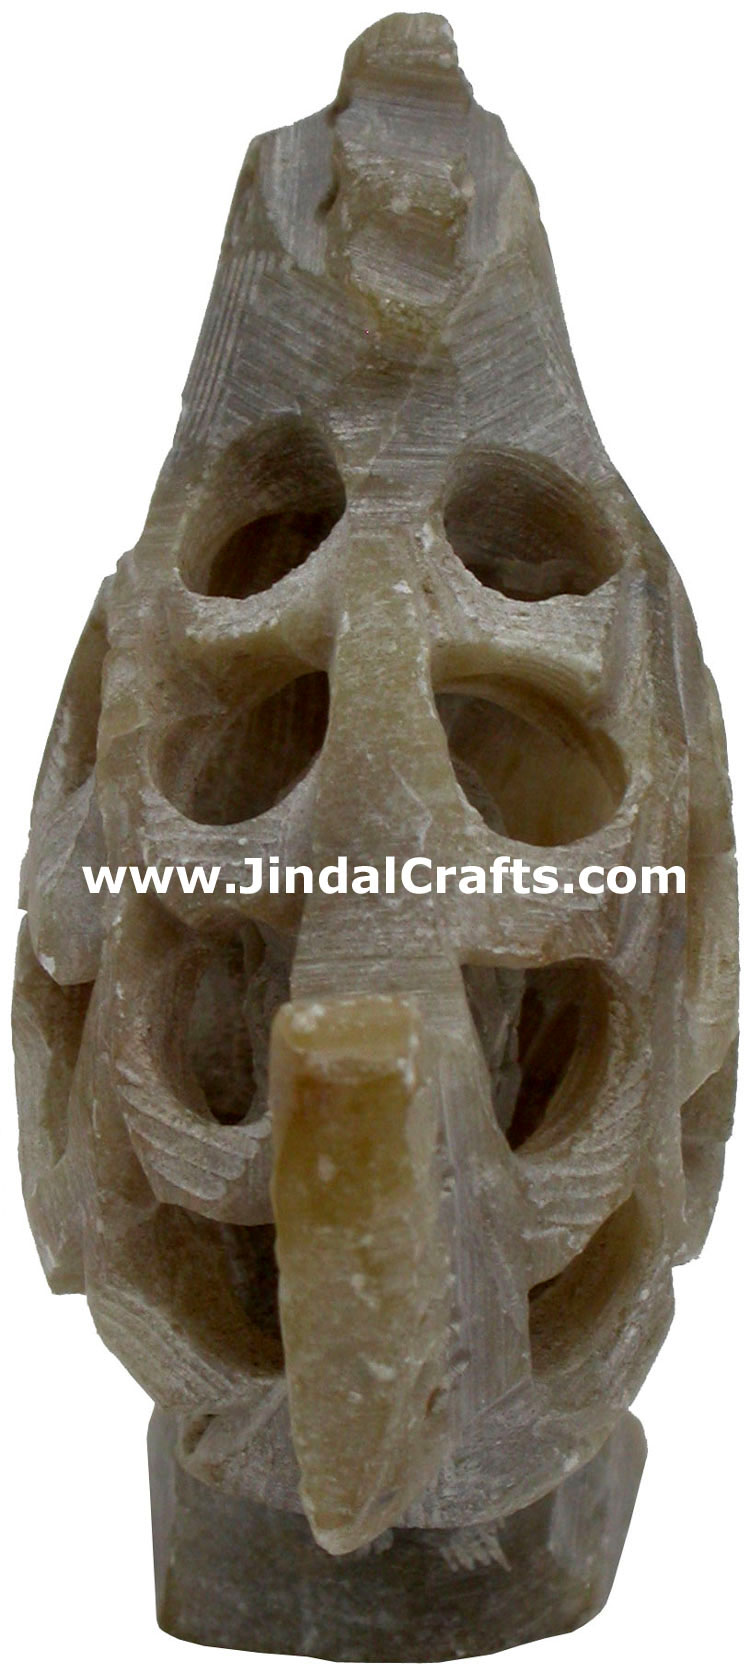 Cock - Hand Carved Soft Stone Birds Figures India Art